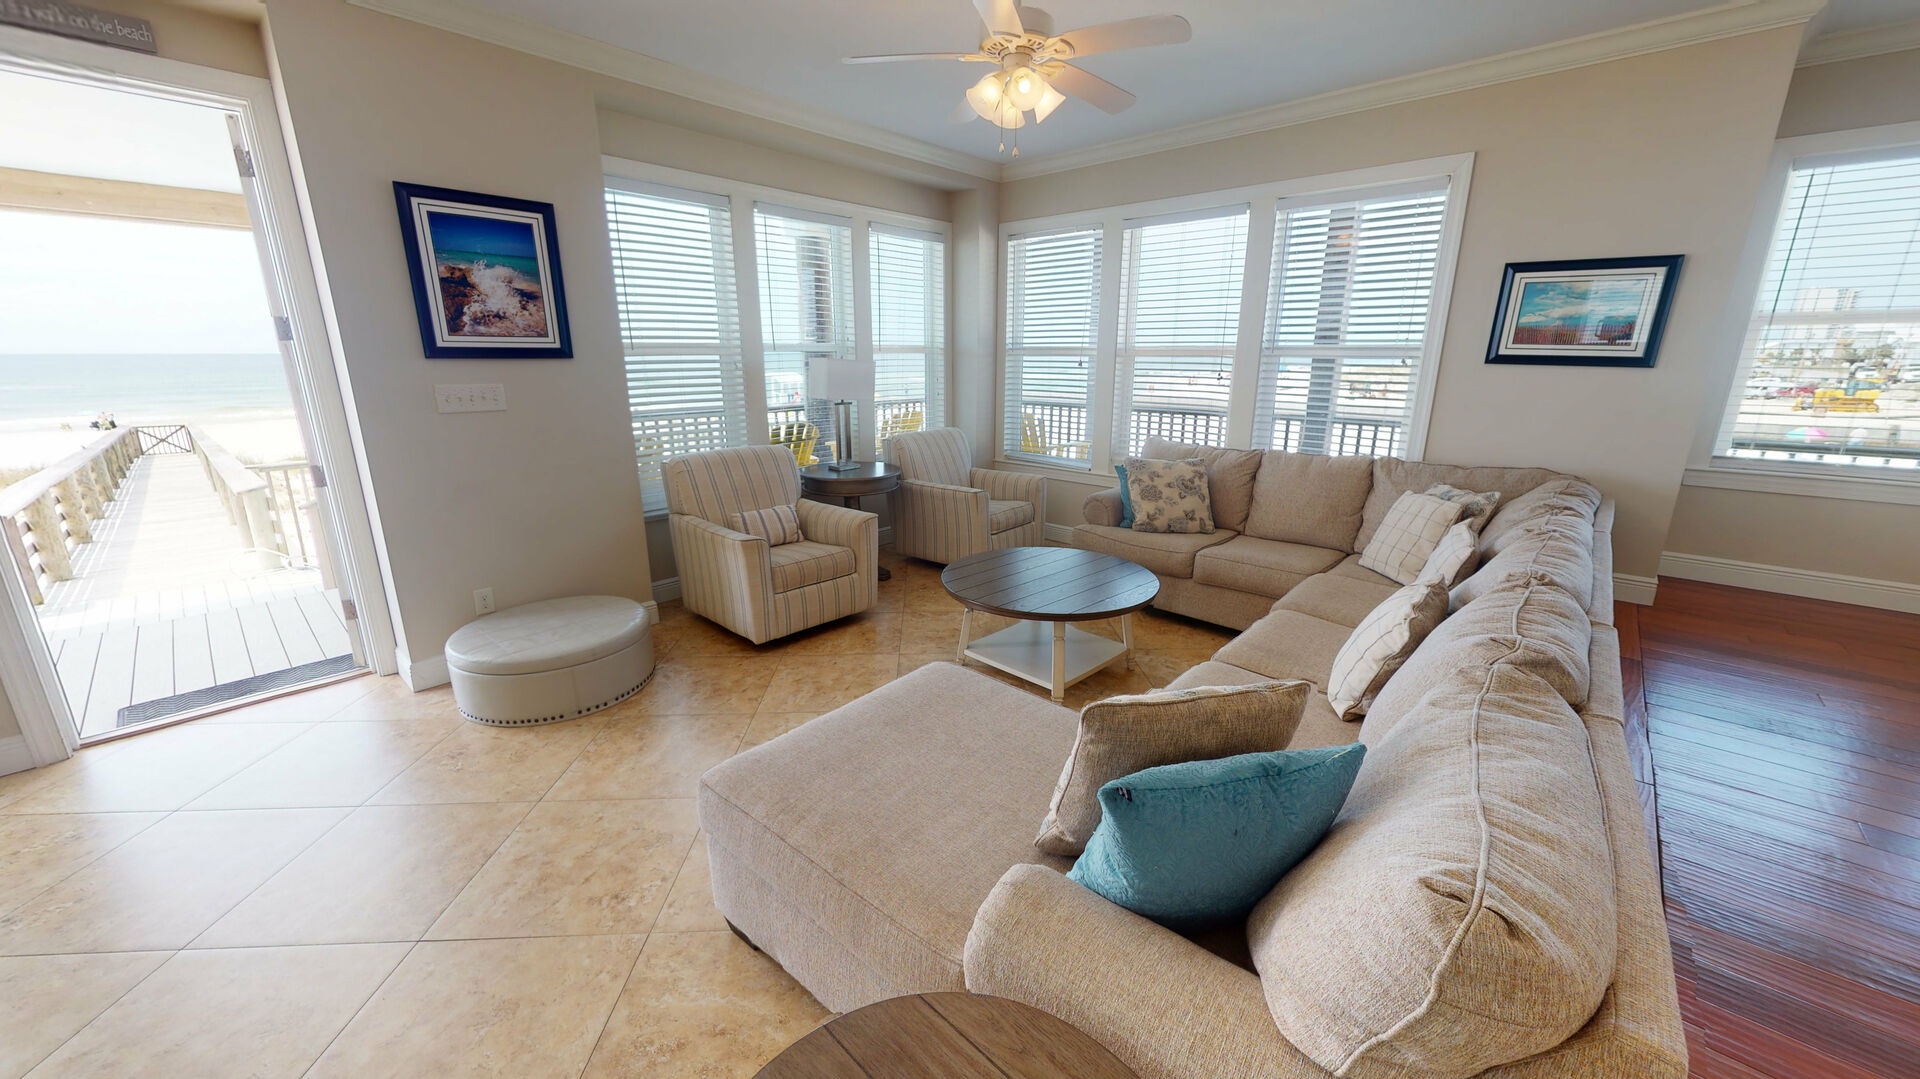 Bright and spacious living area with a large sectional and access to the beach